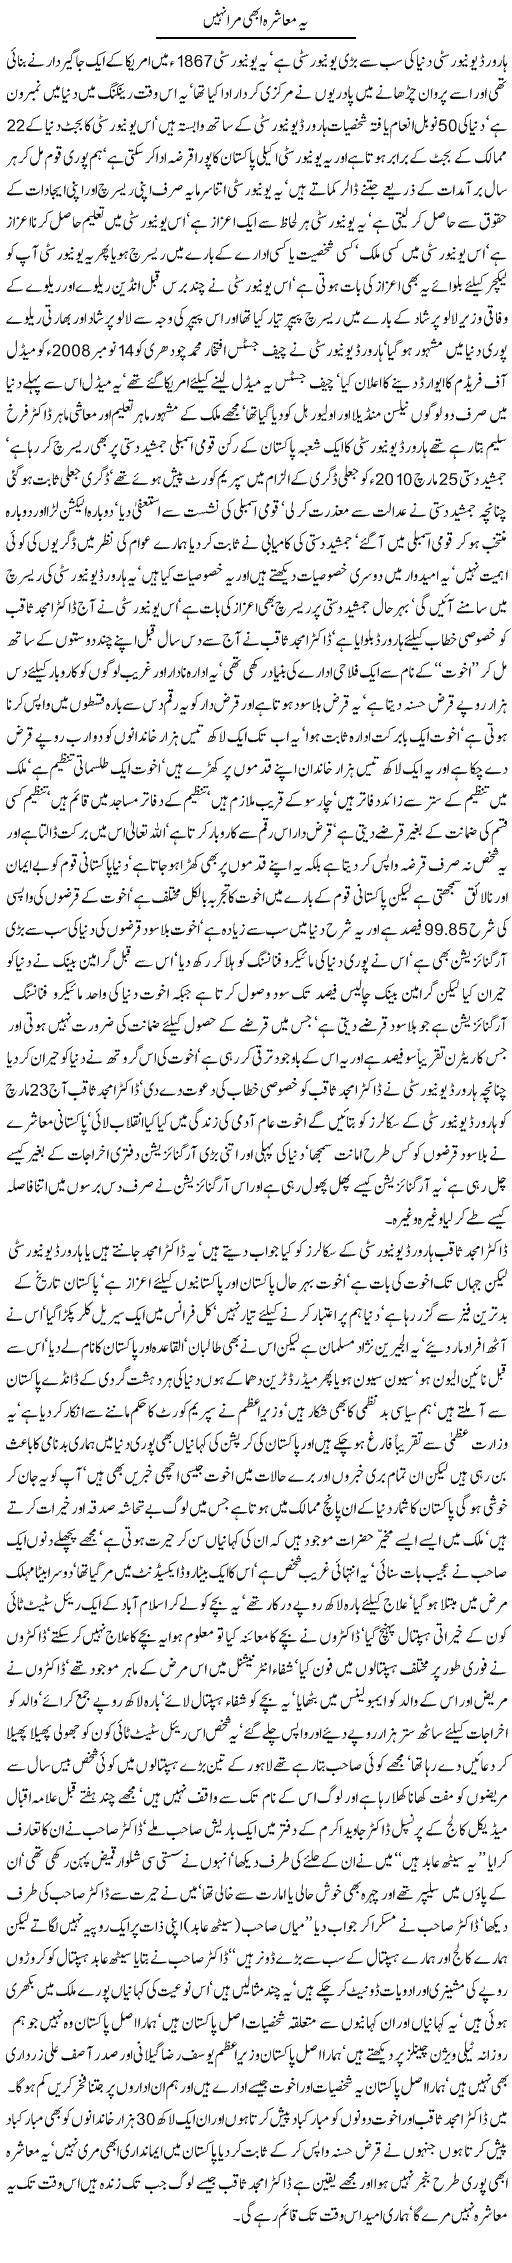 This Society Express Column Javed Chaudhry 23 March 2012